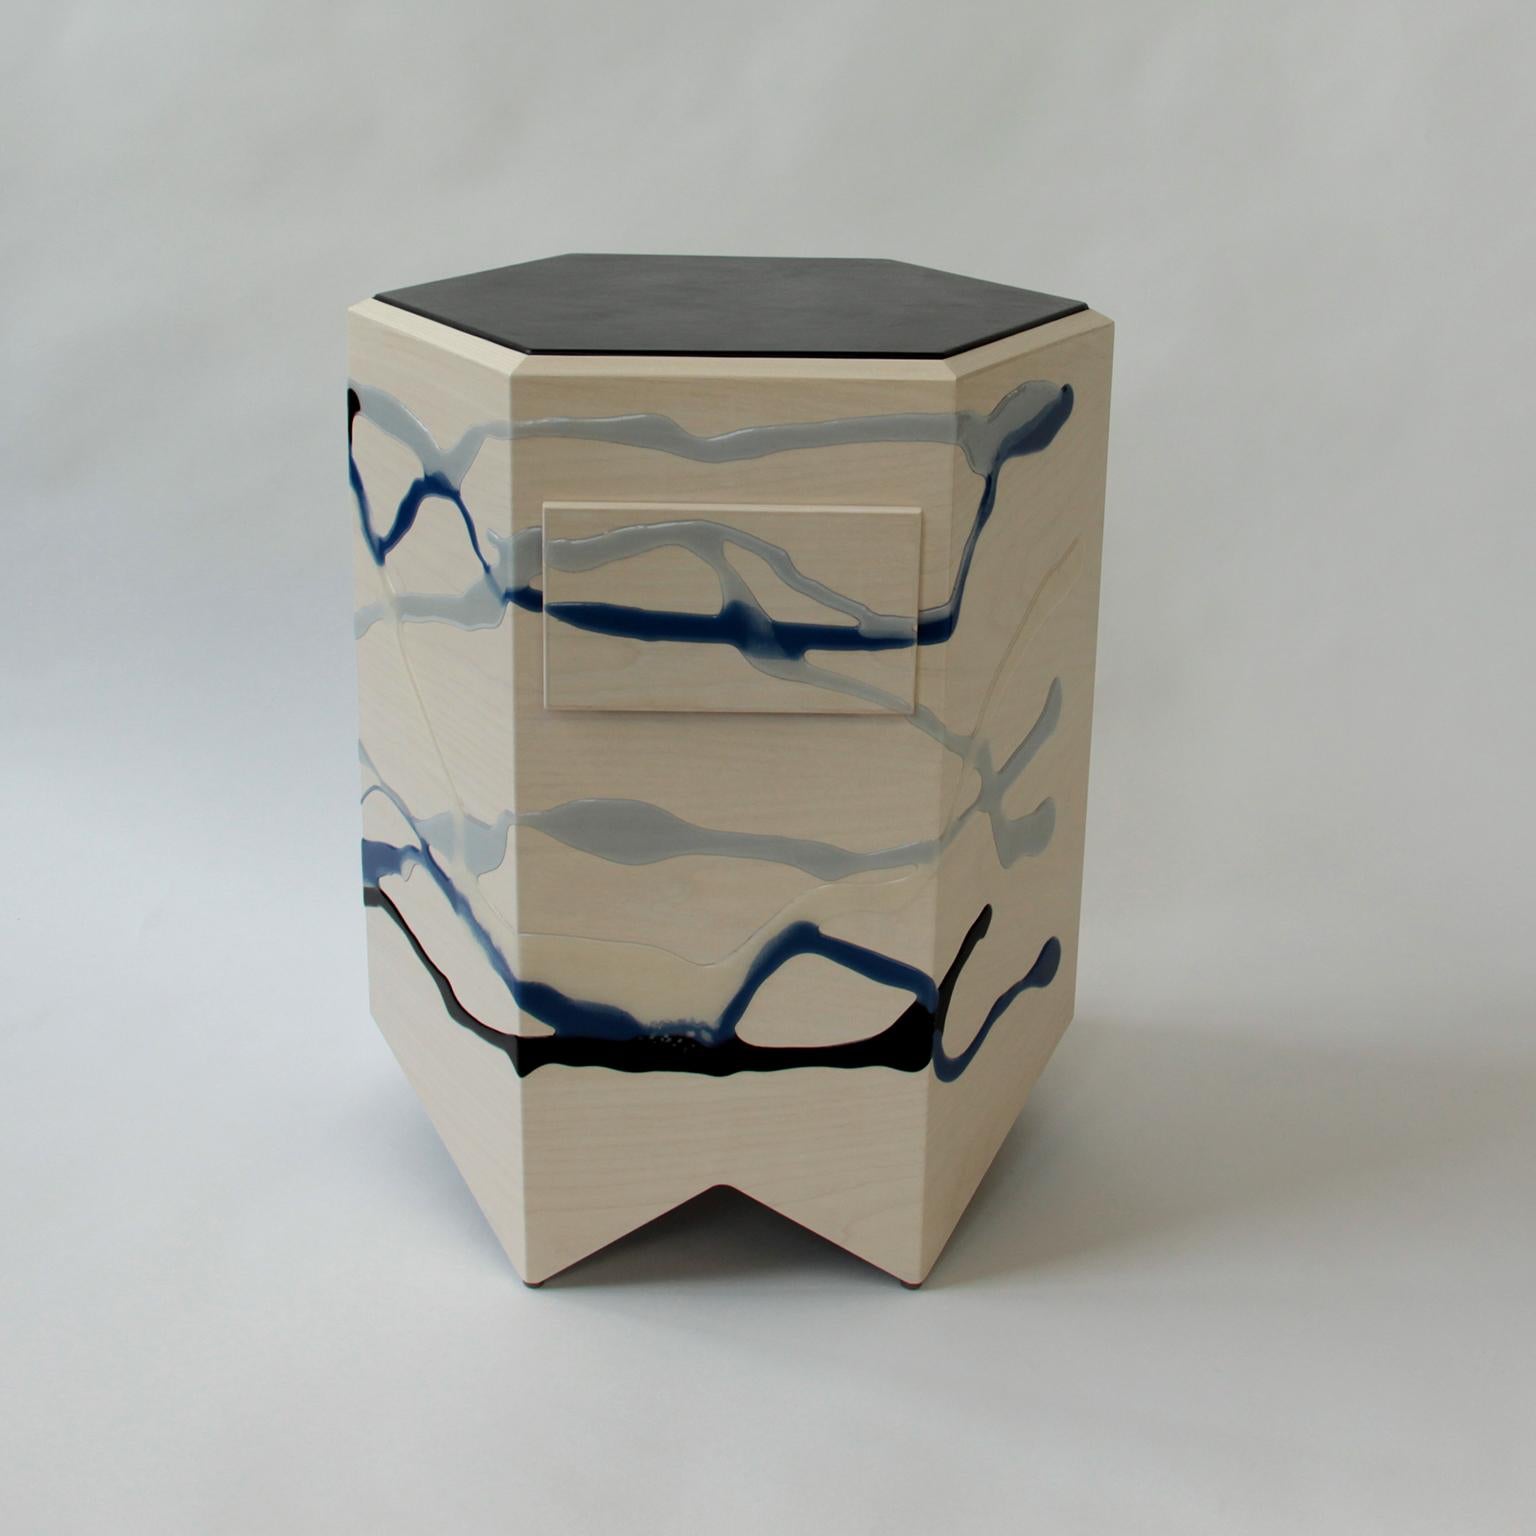 The Drip/Fold Nightstand by Noble Goods is constructed of a single sheet of ash plywood that has been hand-dripped with liquid resin, then bent into a hexagonal shape. Finished with a leather top.

Drawer measures 8